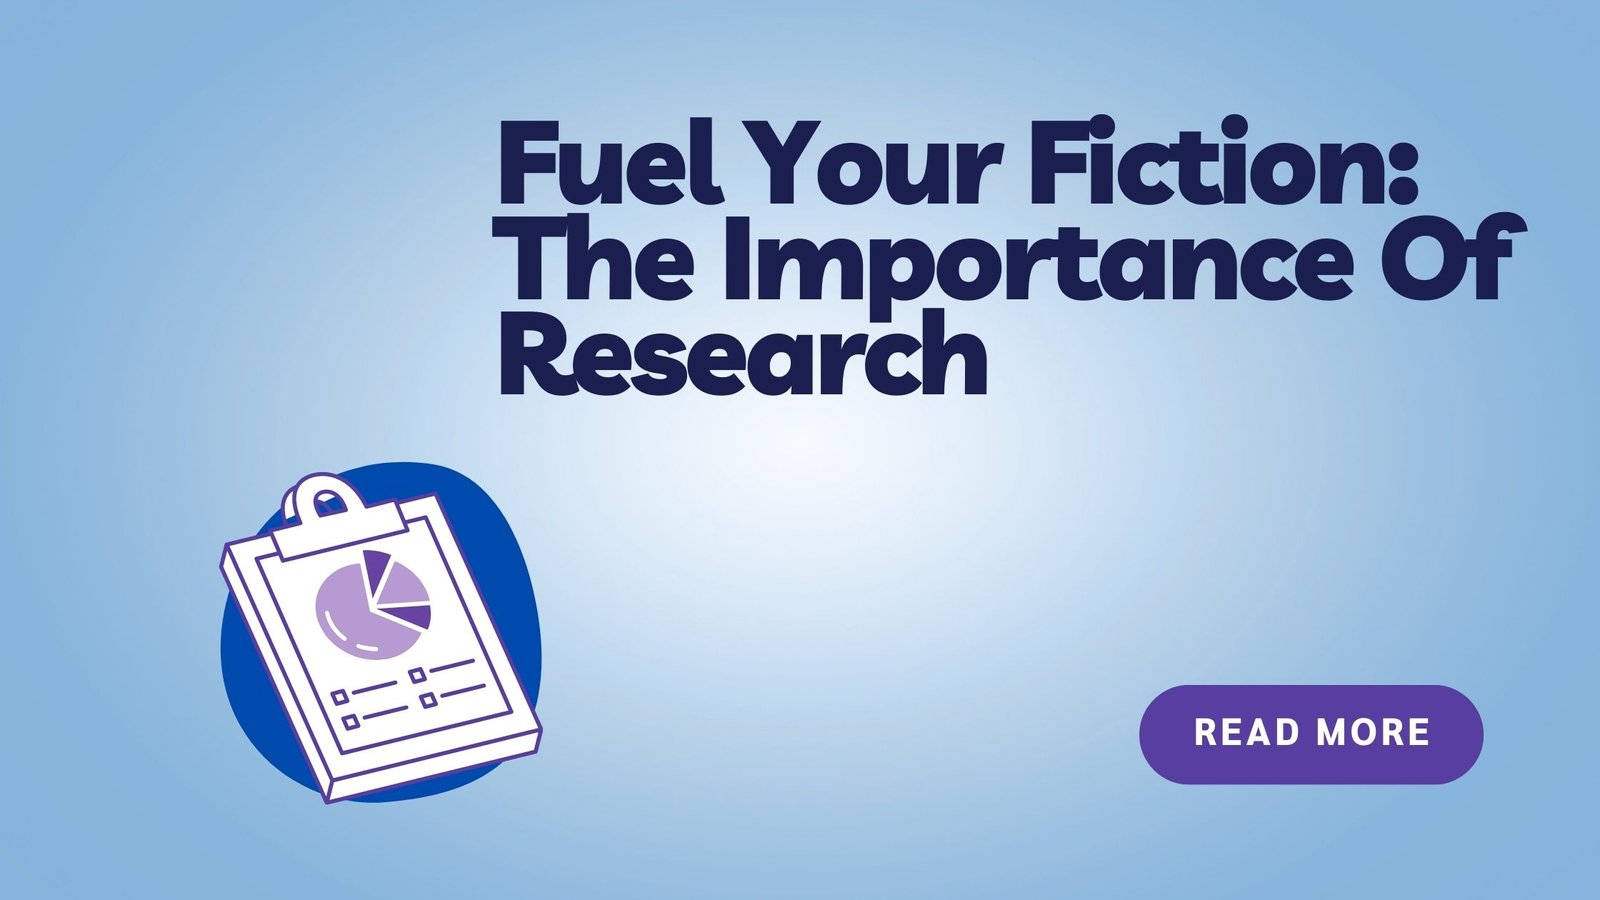 FUEL YOUR FICTION: THE IMPORTANCE OF RESEARCH